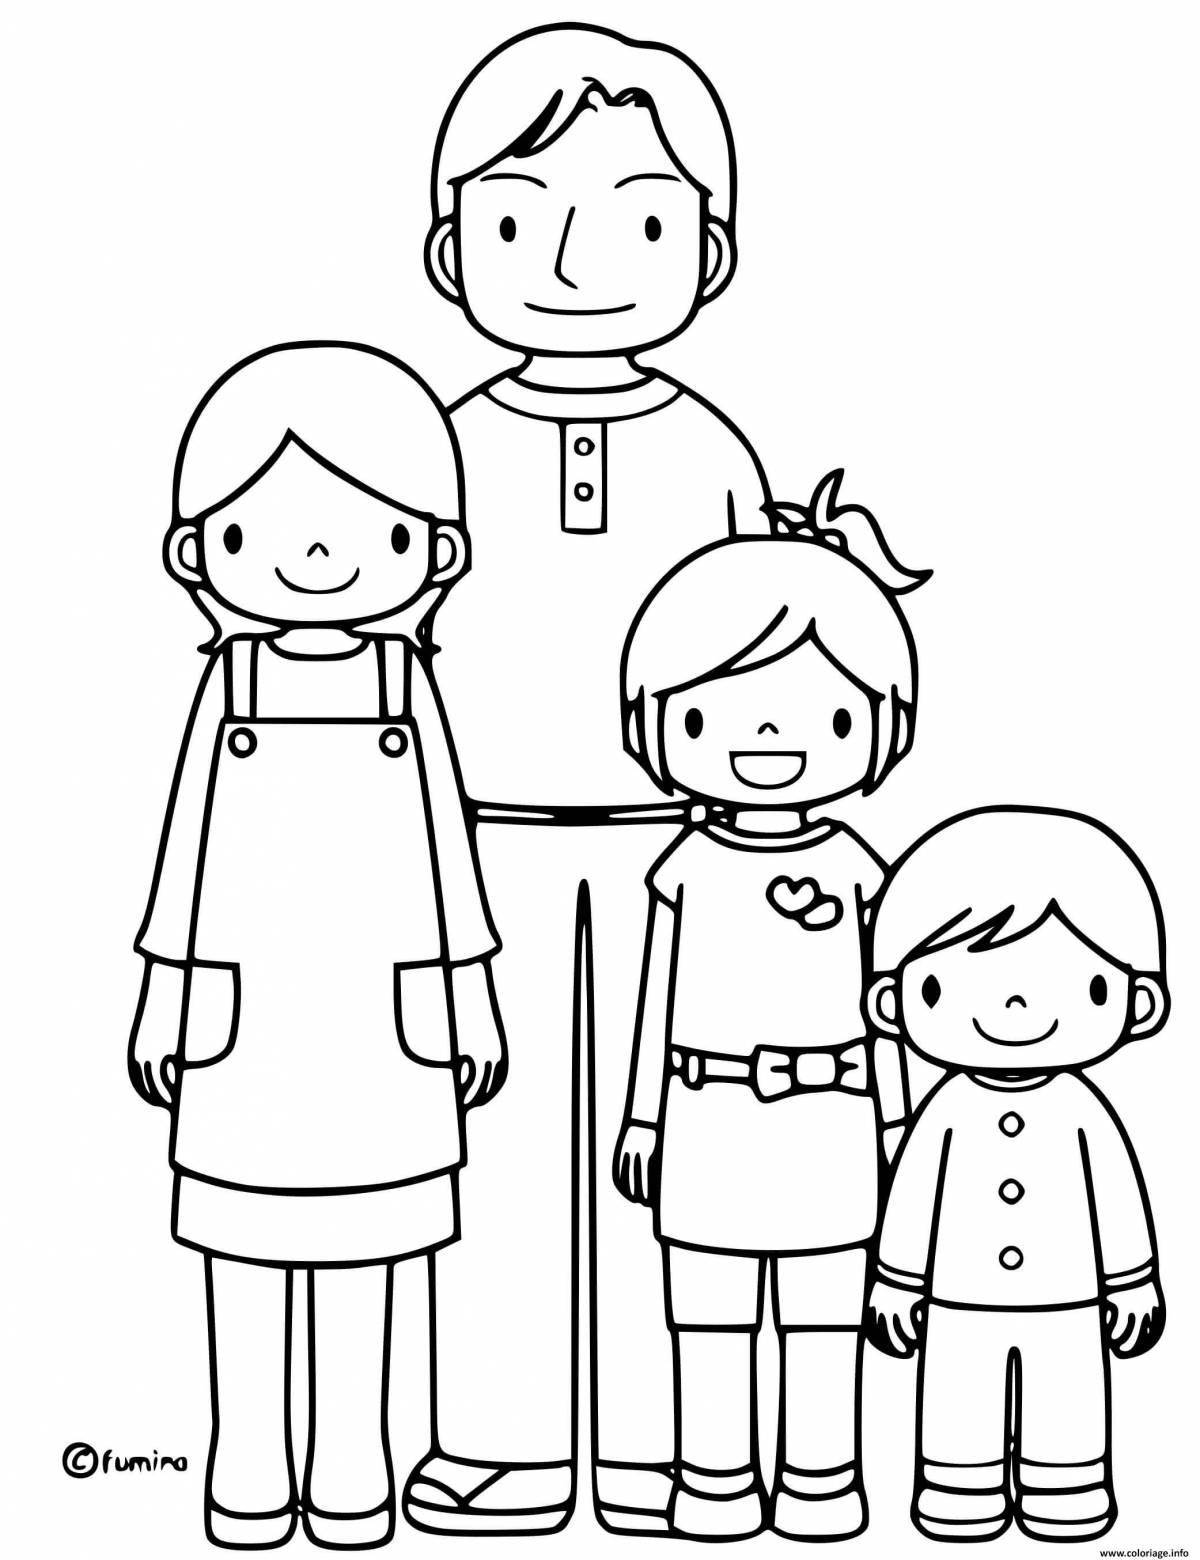 Bright coloring page my family